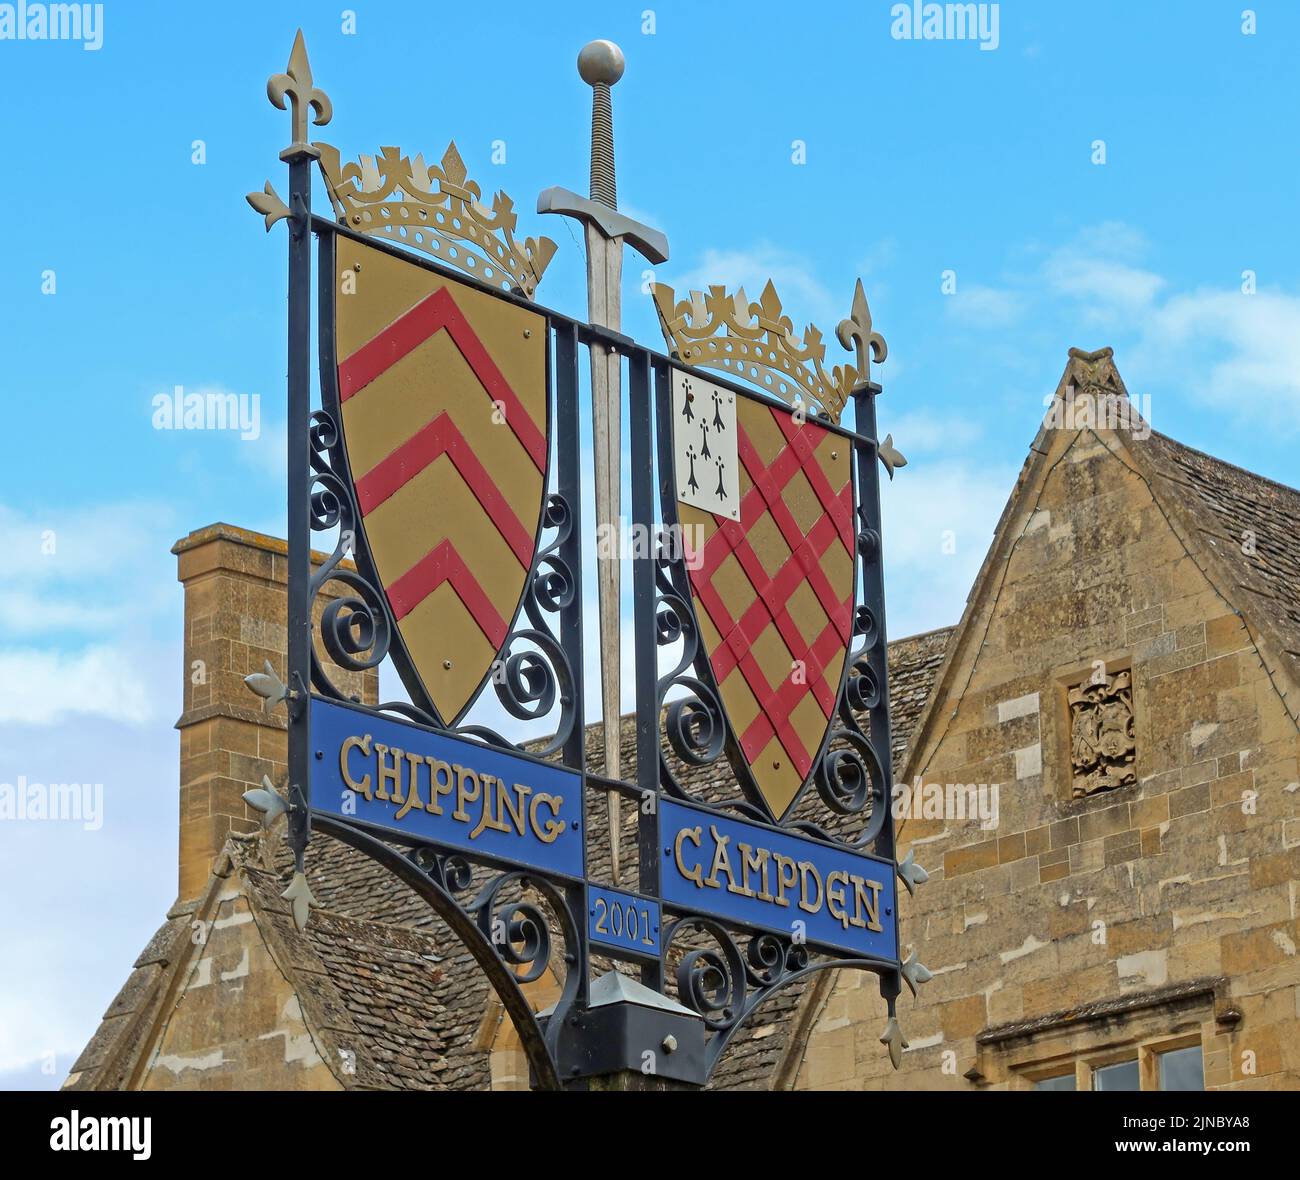 Chipping Campden 2001 sign - coat of arms - Chipping Campden, Cotswolds, Gloucestershire, England, UK, GL55 6AT Stock Photo